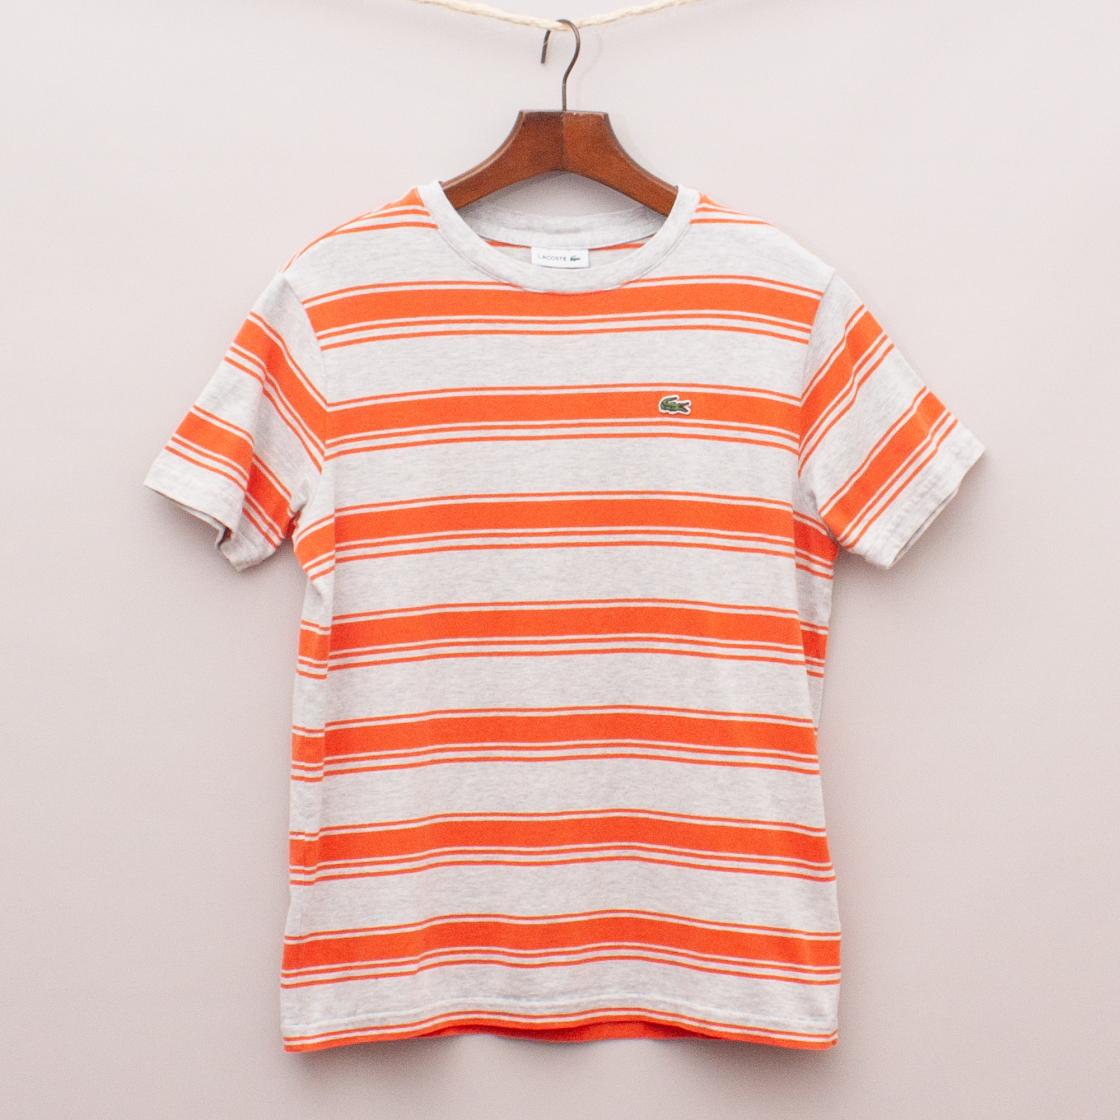 Lacoste Striped T-Shirt